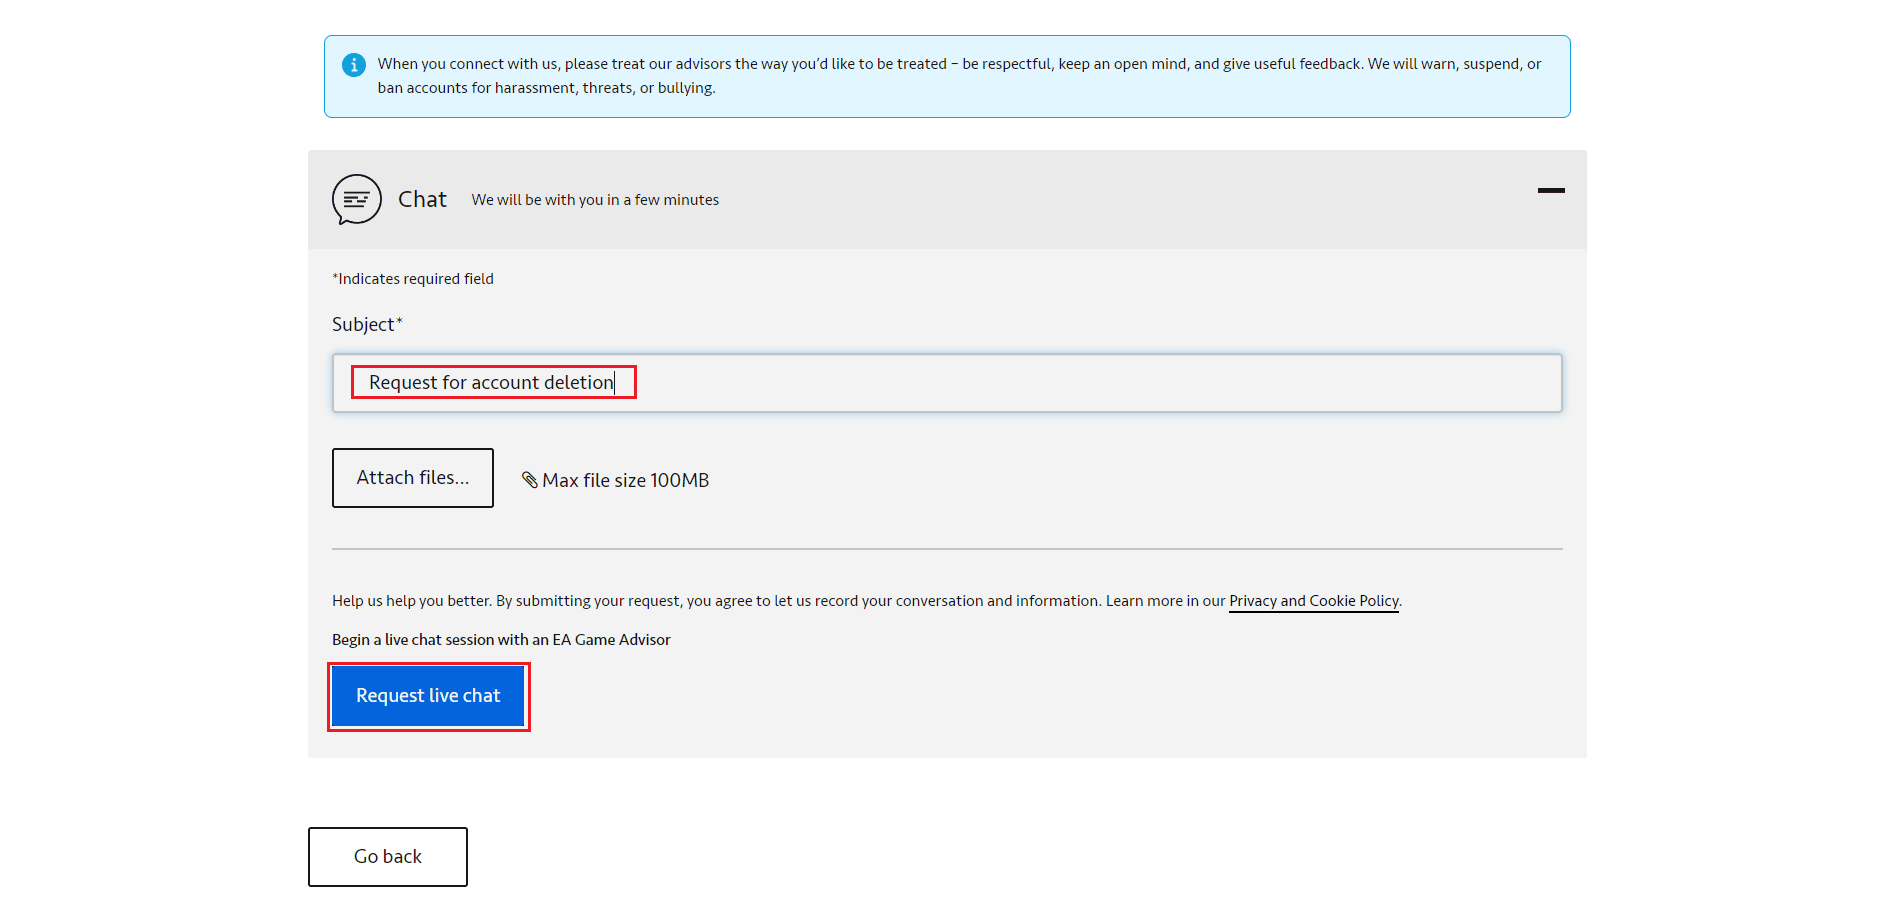 click on Request live chat option